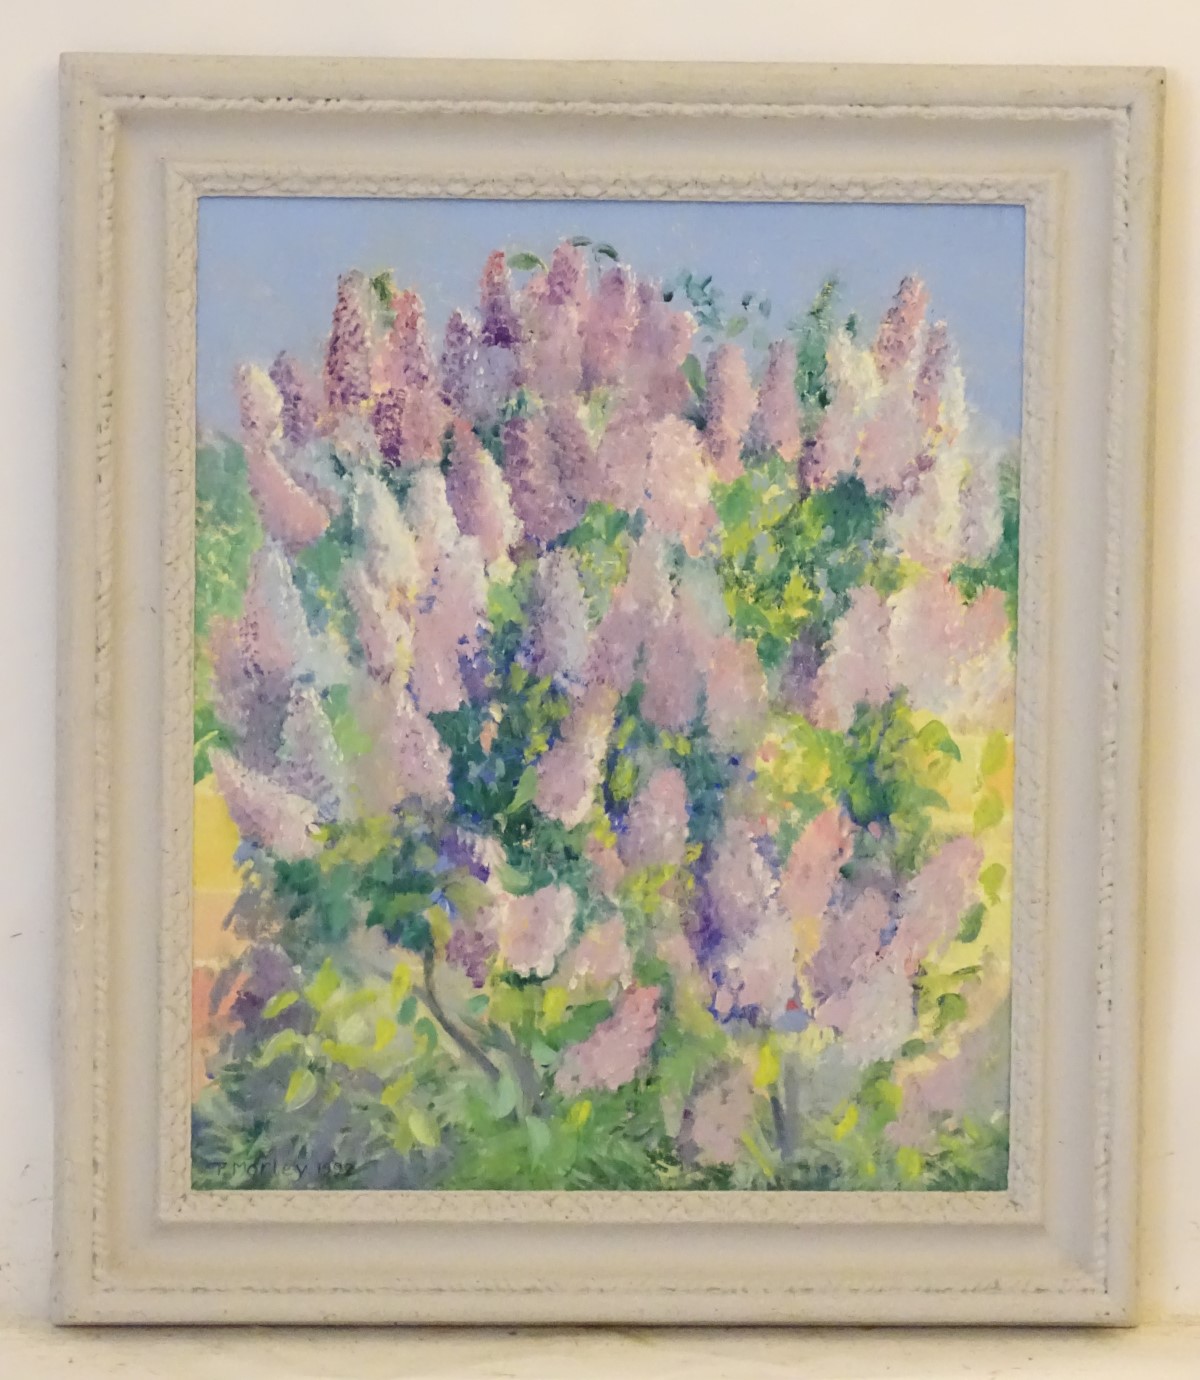 P Morley, 1992, Oil on canvas, A lupin bush, Signed and dated lower left. - Image 7 of 12